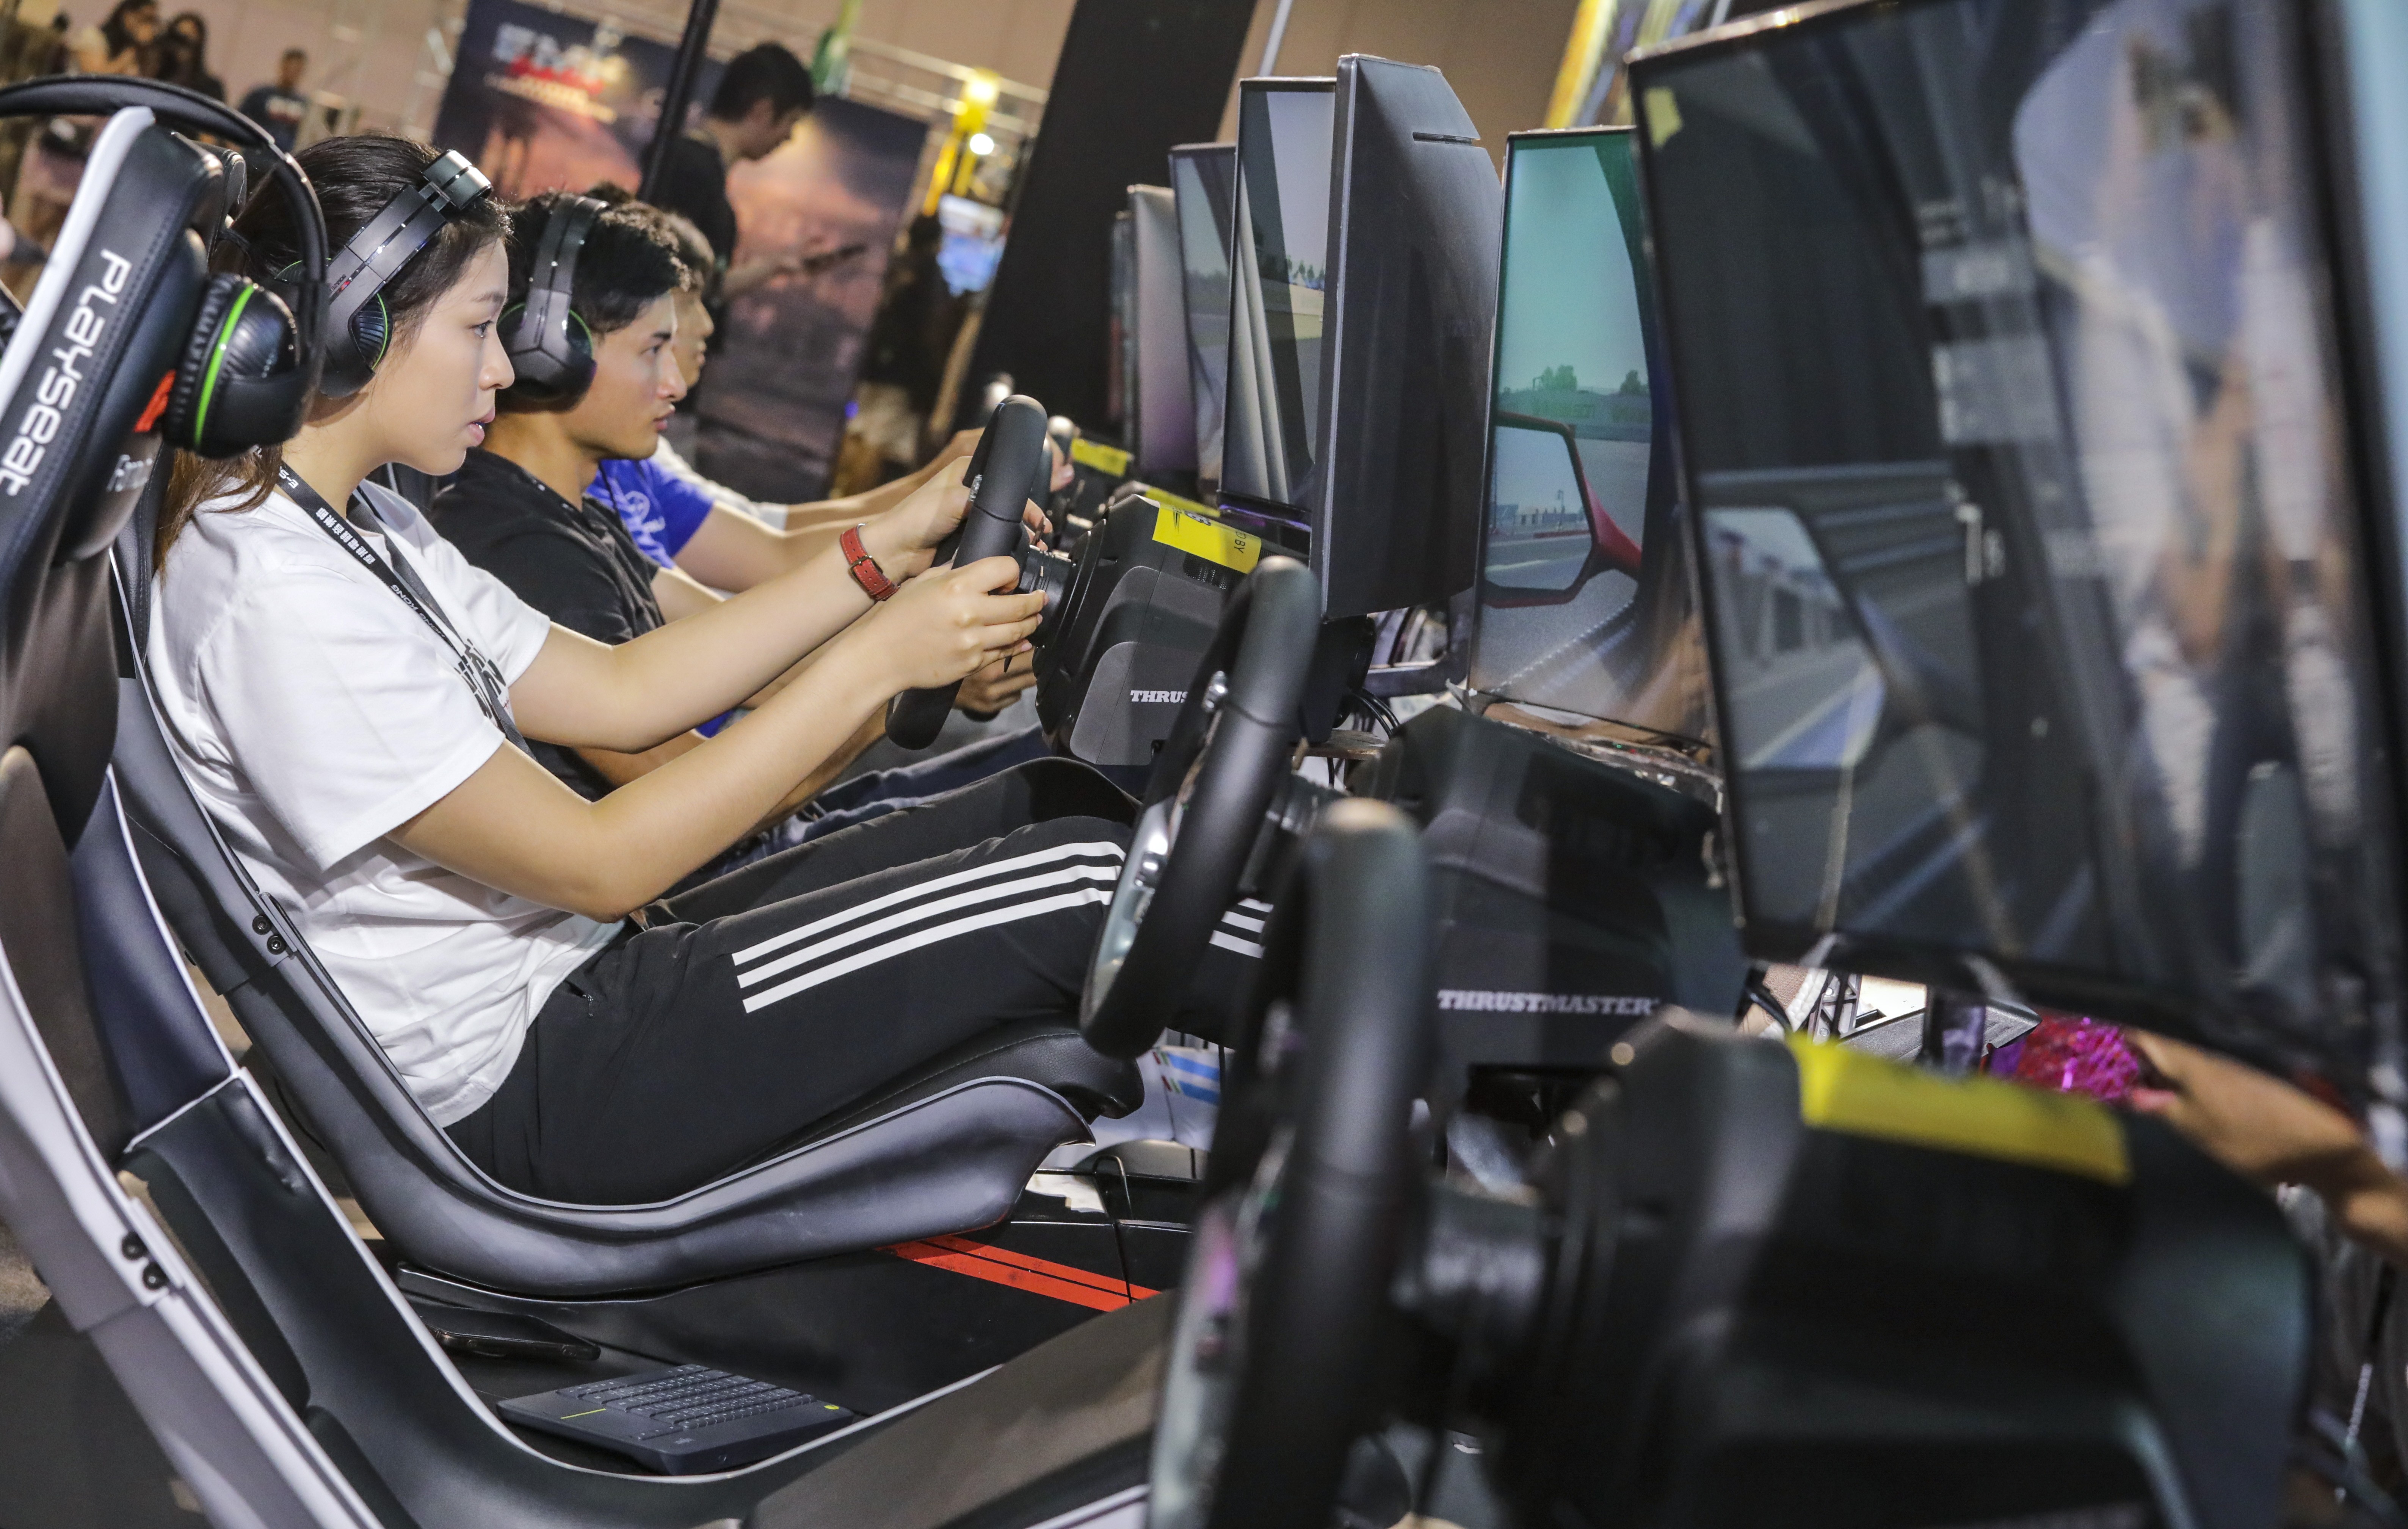 The third annual E-Sports and Music Festival Hong Kong opens on Friday at the Hong Kong Convention and Exhibition Centre. Photo: May Tse